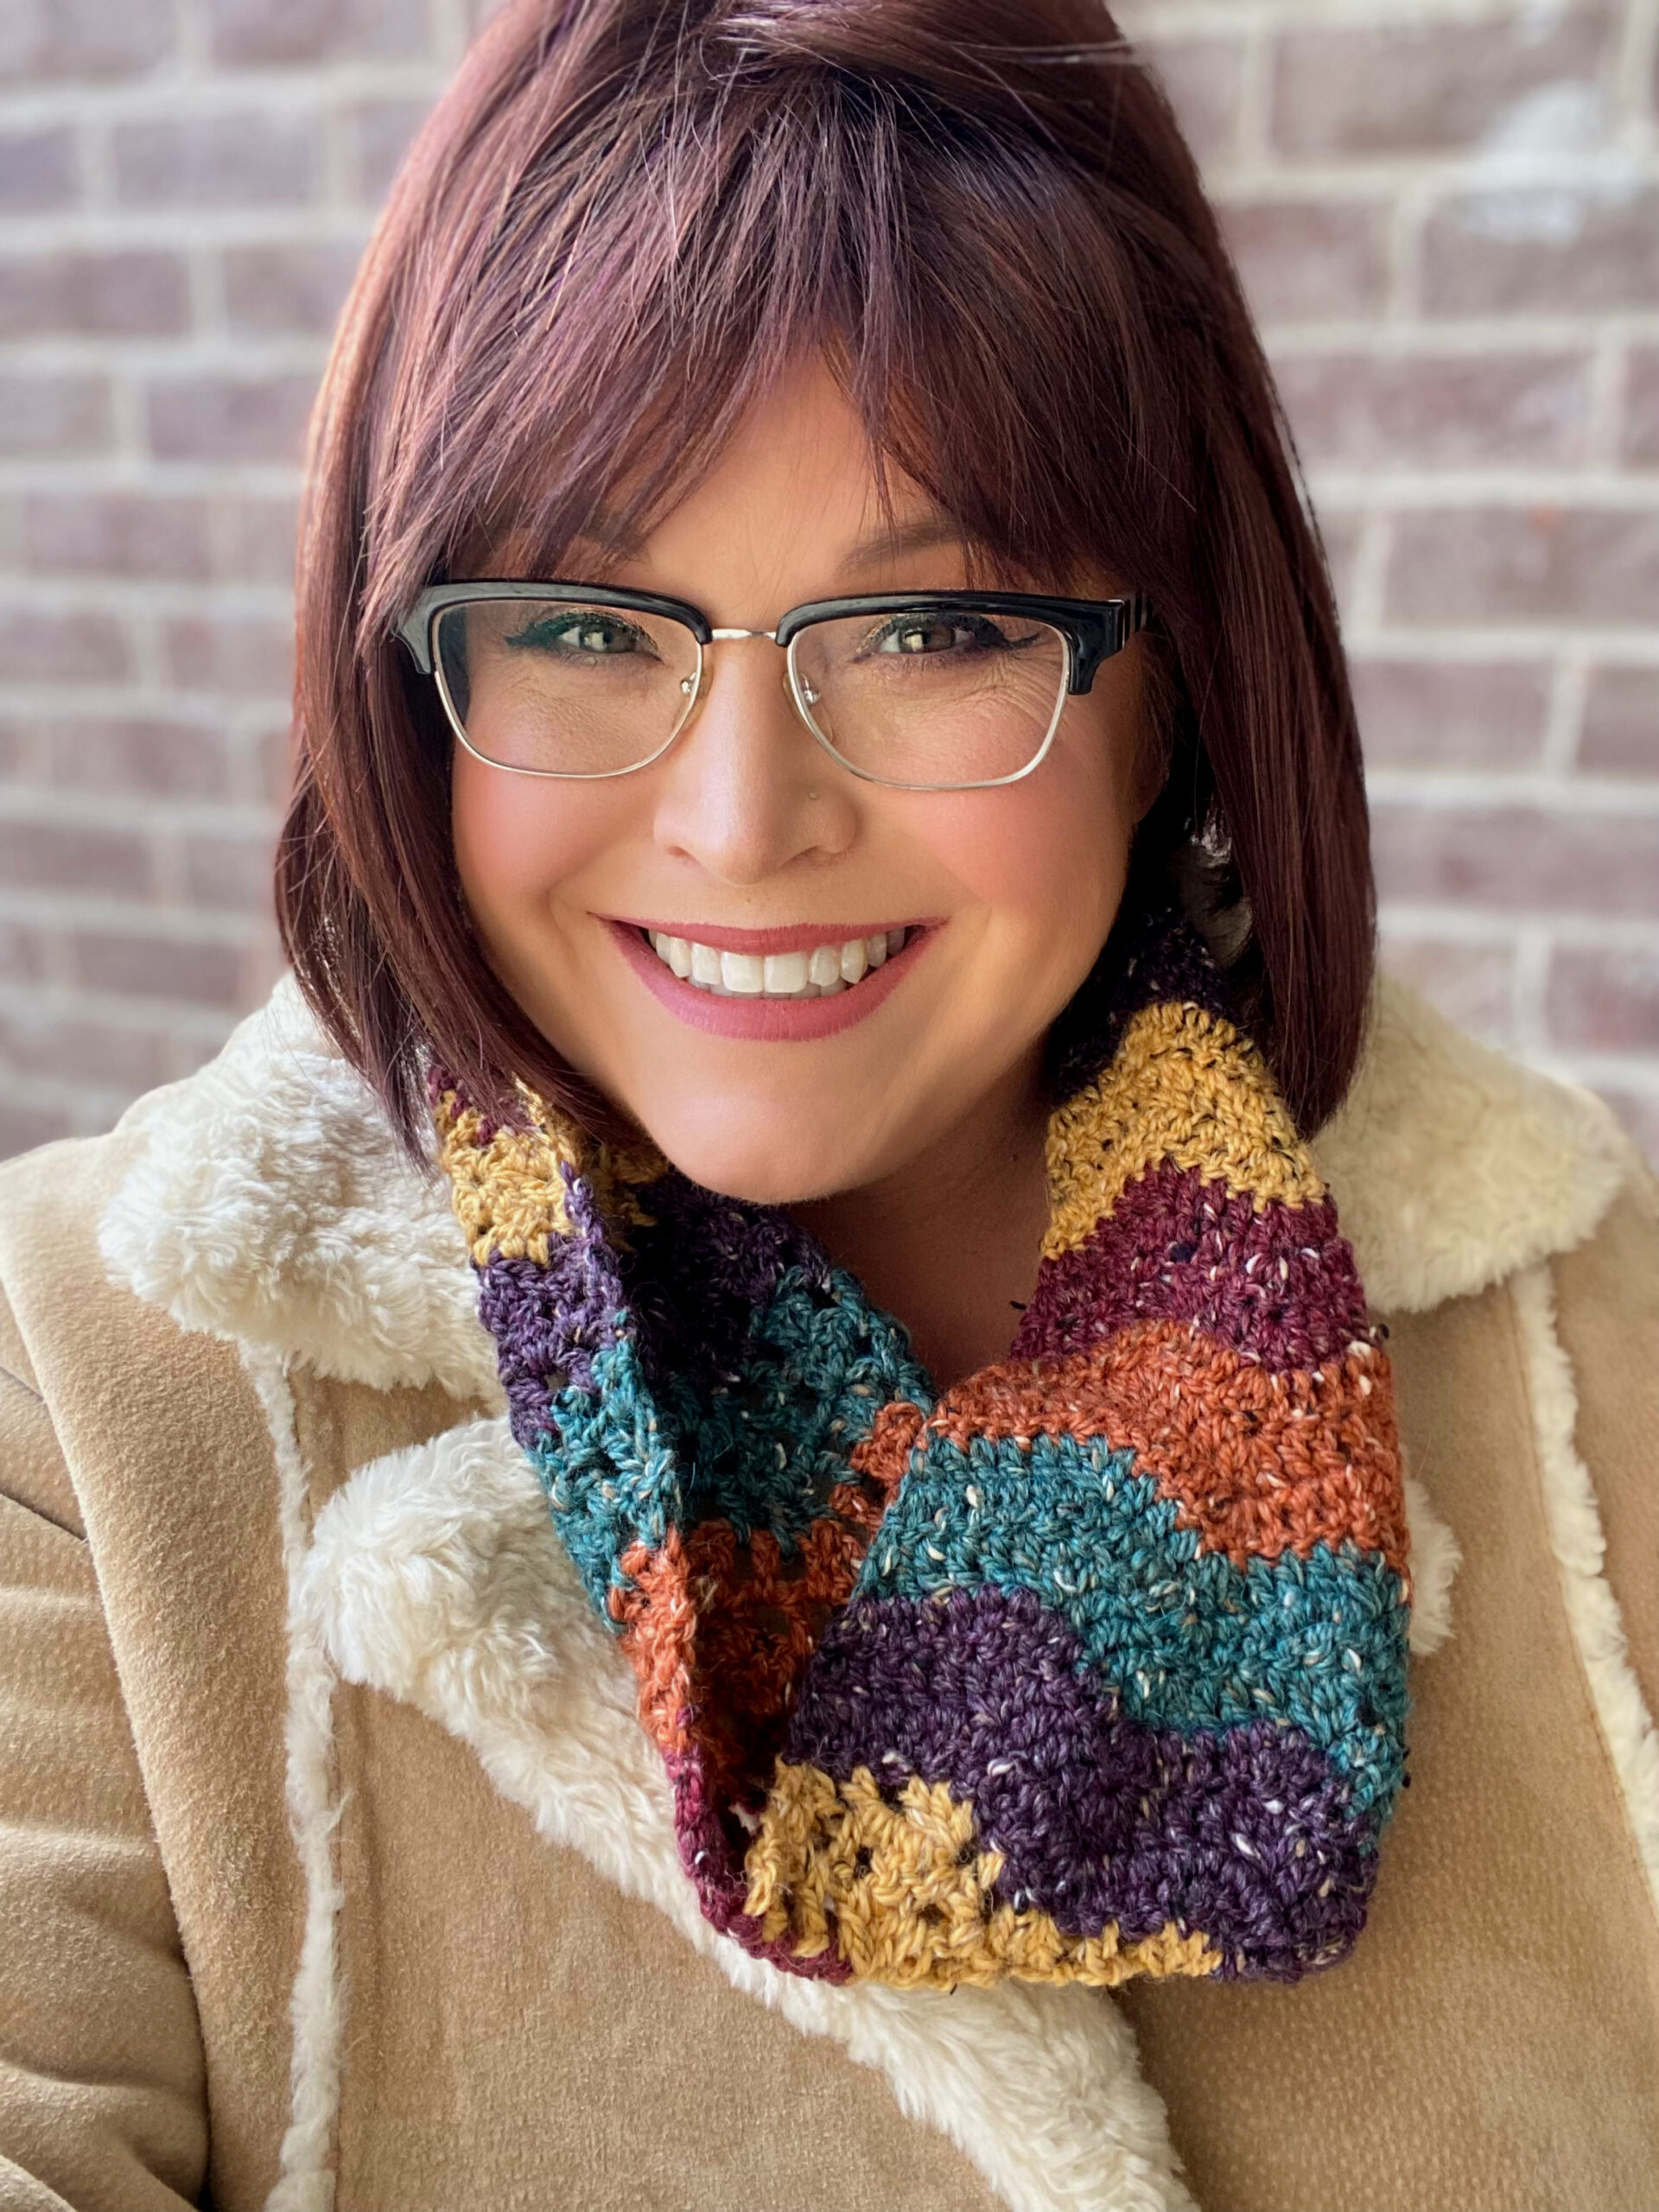 City Tweed Crochet Chevron Scarf Pattern by Marly Bird. This image is Marly wearing the cowl around her neck in bold jewel tones. 